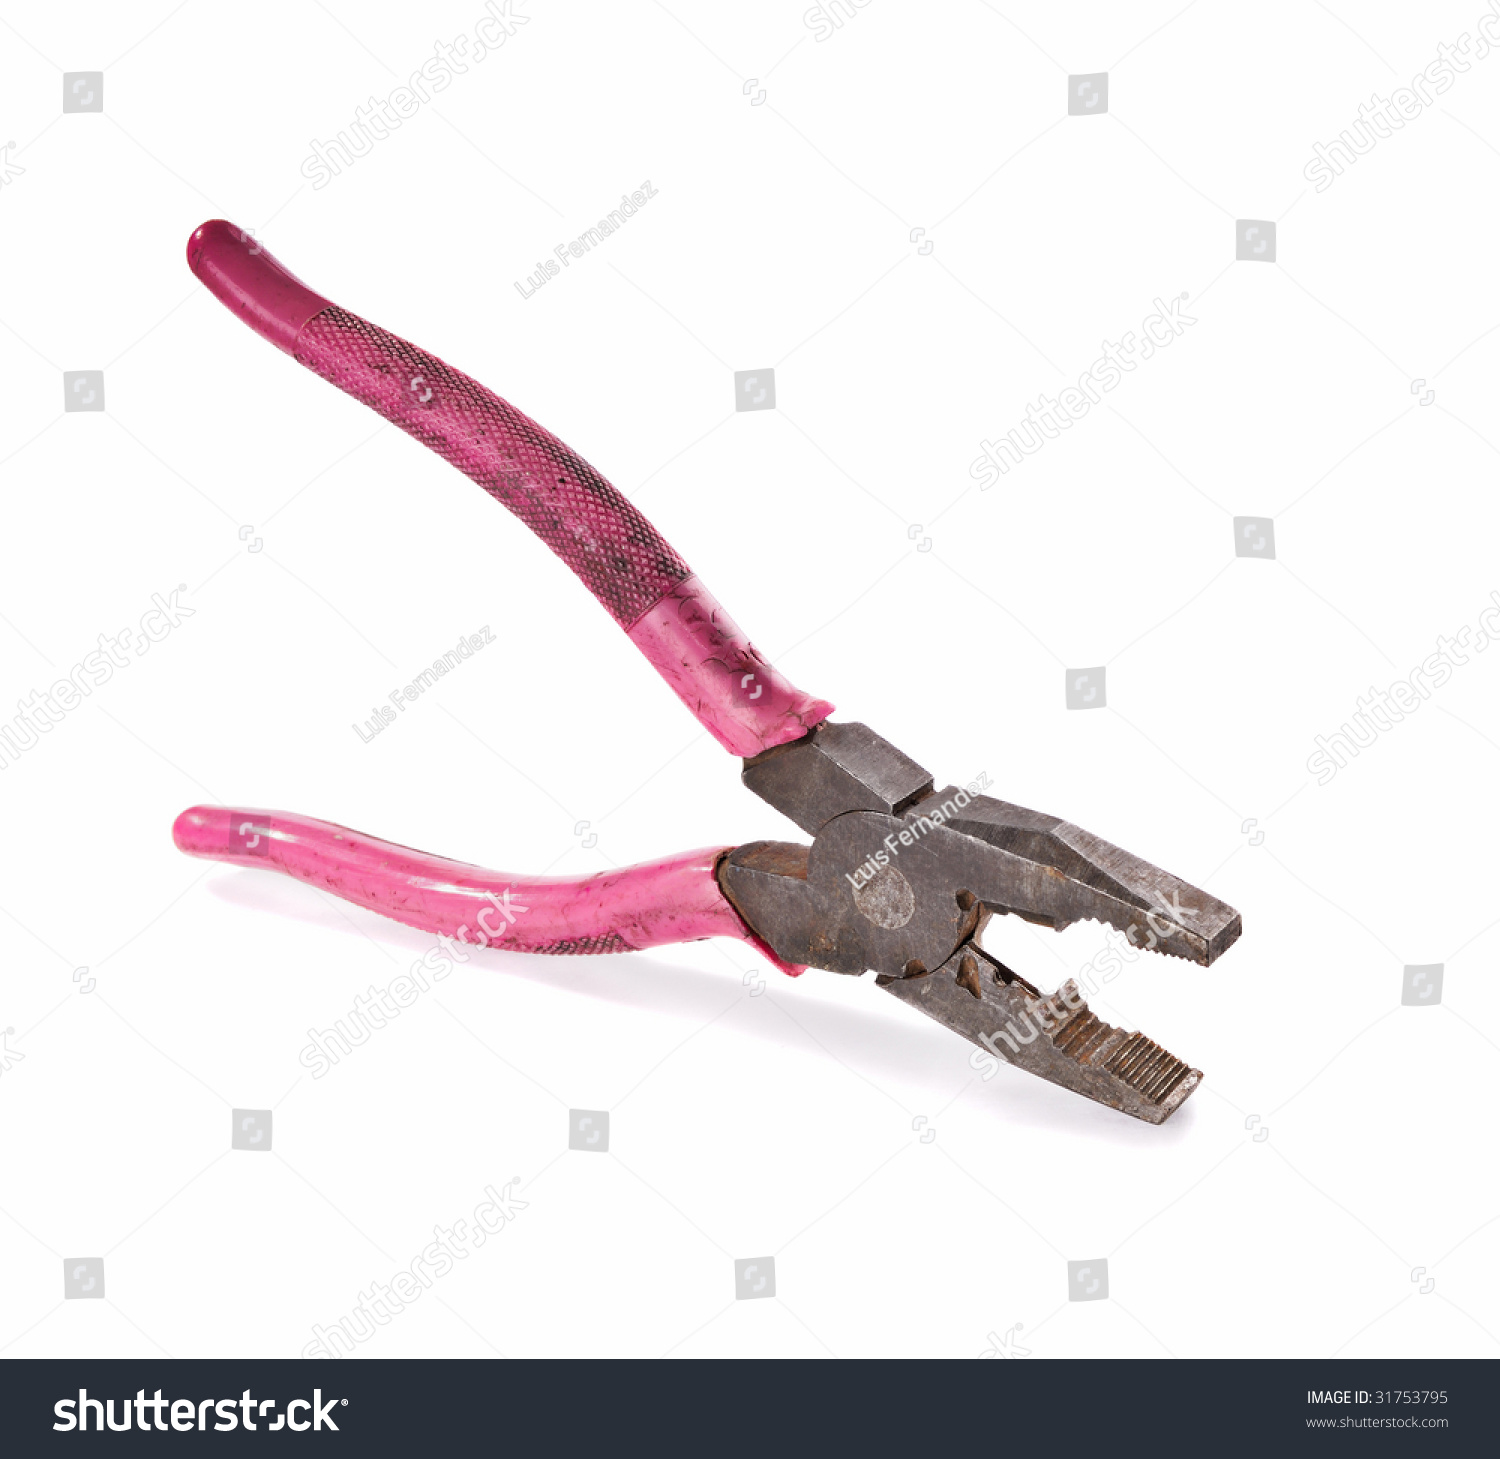 Old Rusty Pliers Showing Corroded Damaged Stock Photo 31753795 ...